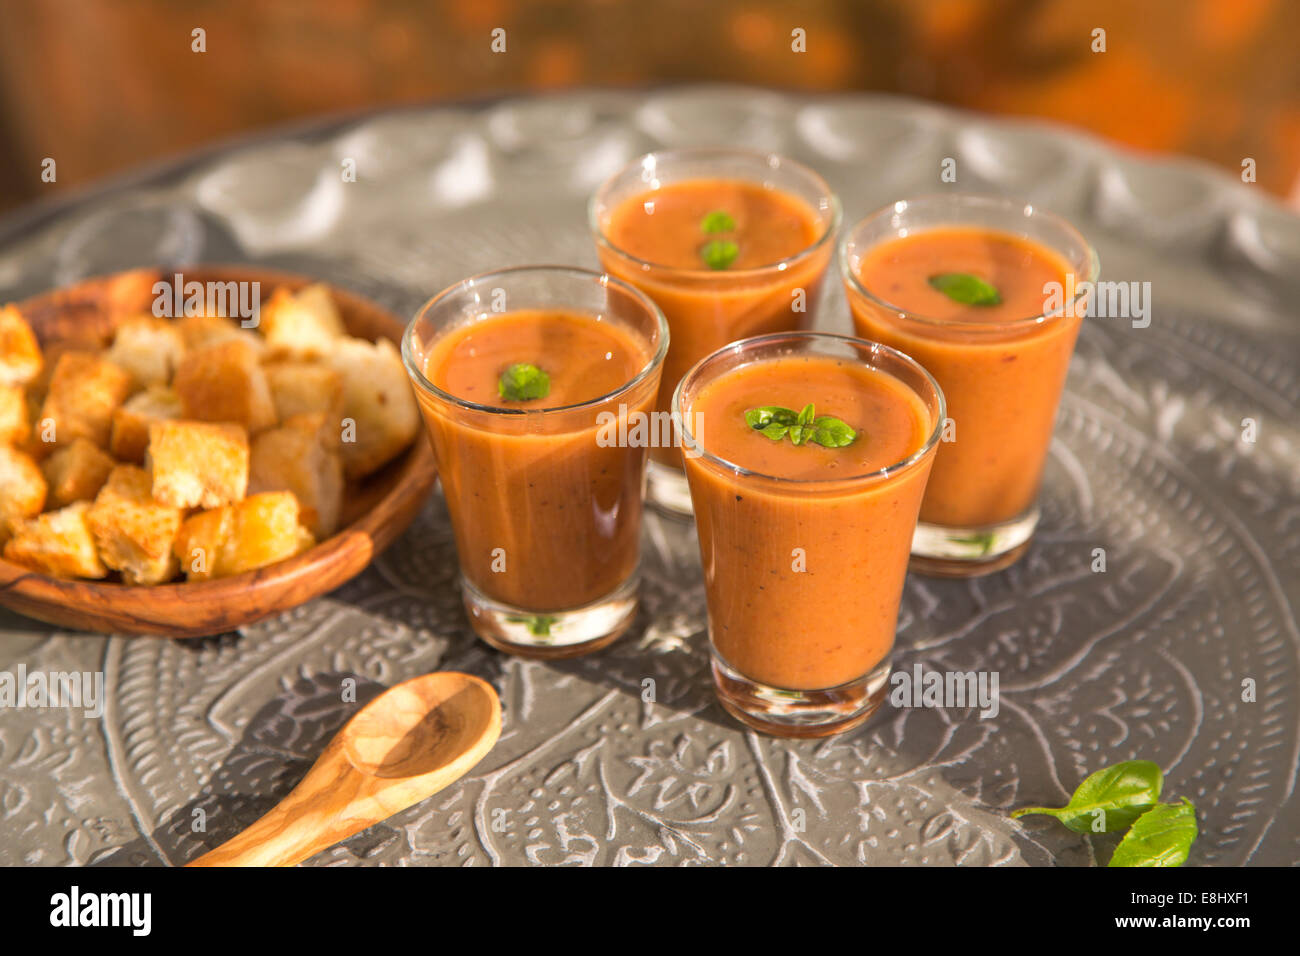 outdoors shot of tomato gazpacho or soup in glasses with basil on metal tray Stock Photo